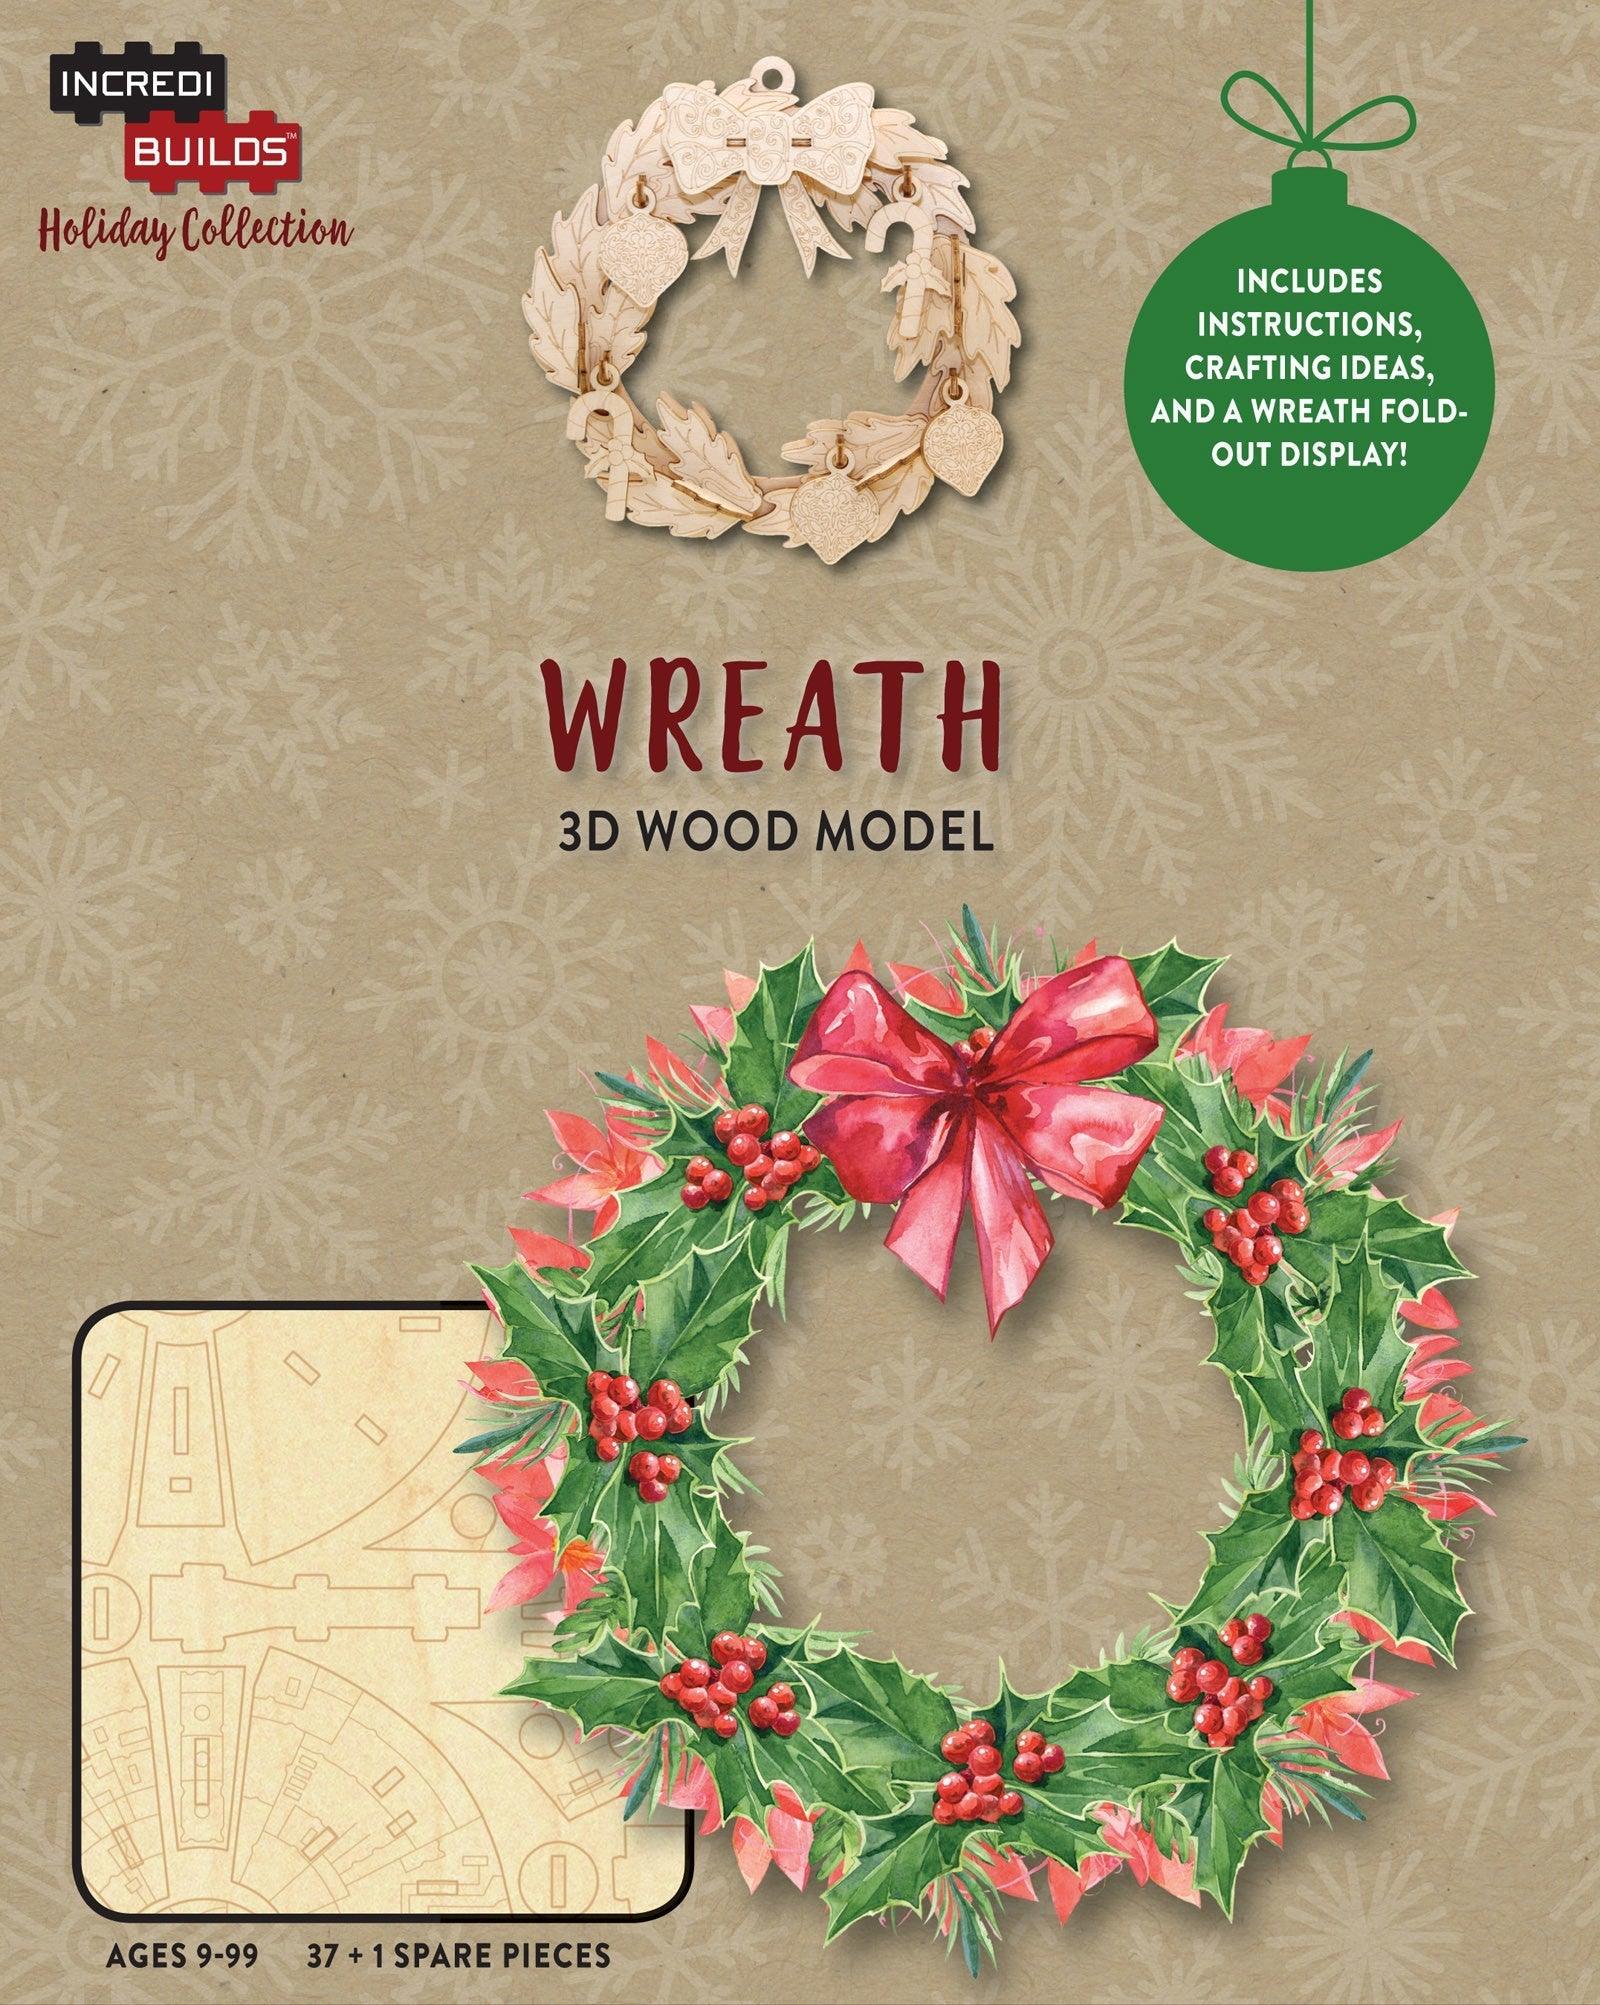 VR-49762 Incredibuilds Christmas Holiday Collection Wreath - Insight Editions - Titan Pop Culture